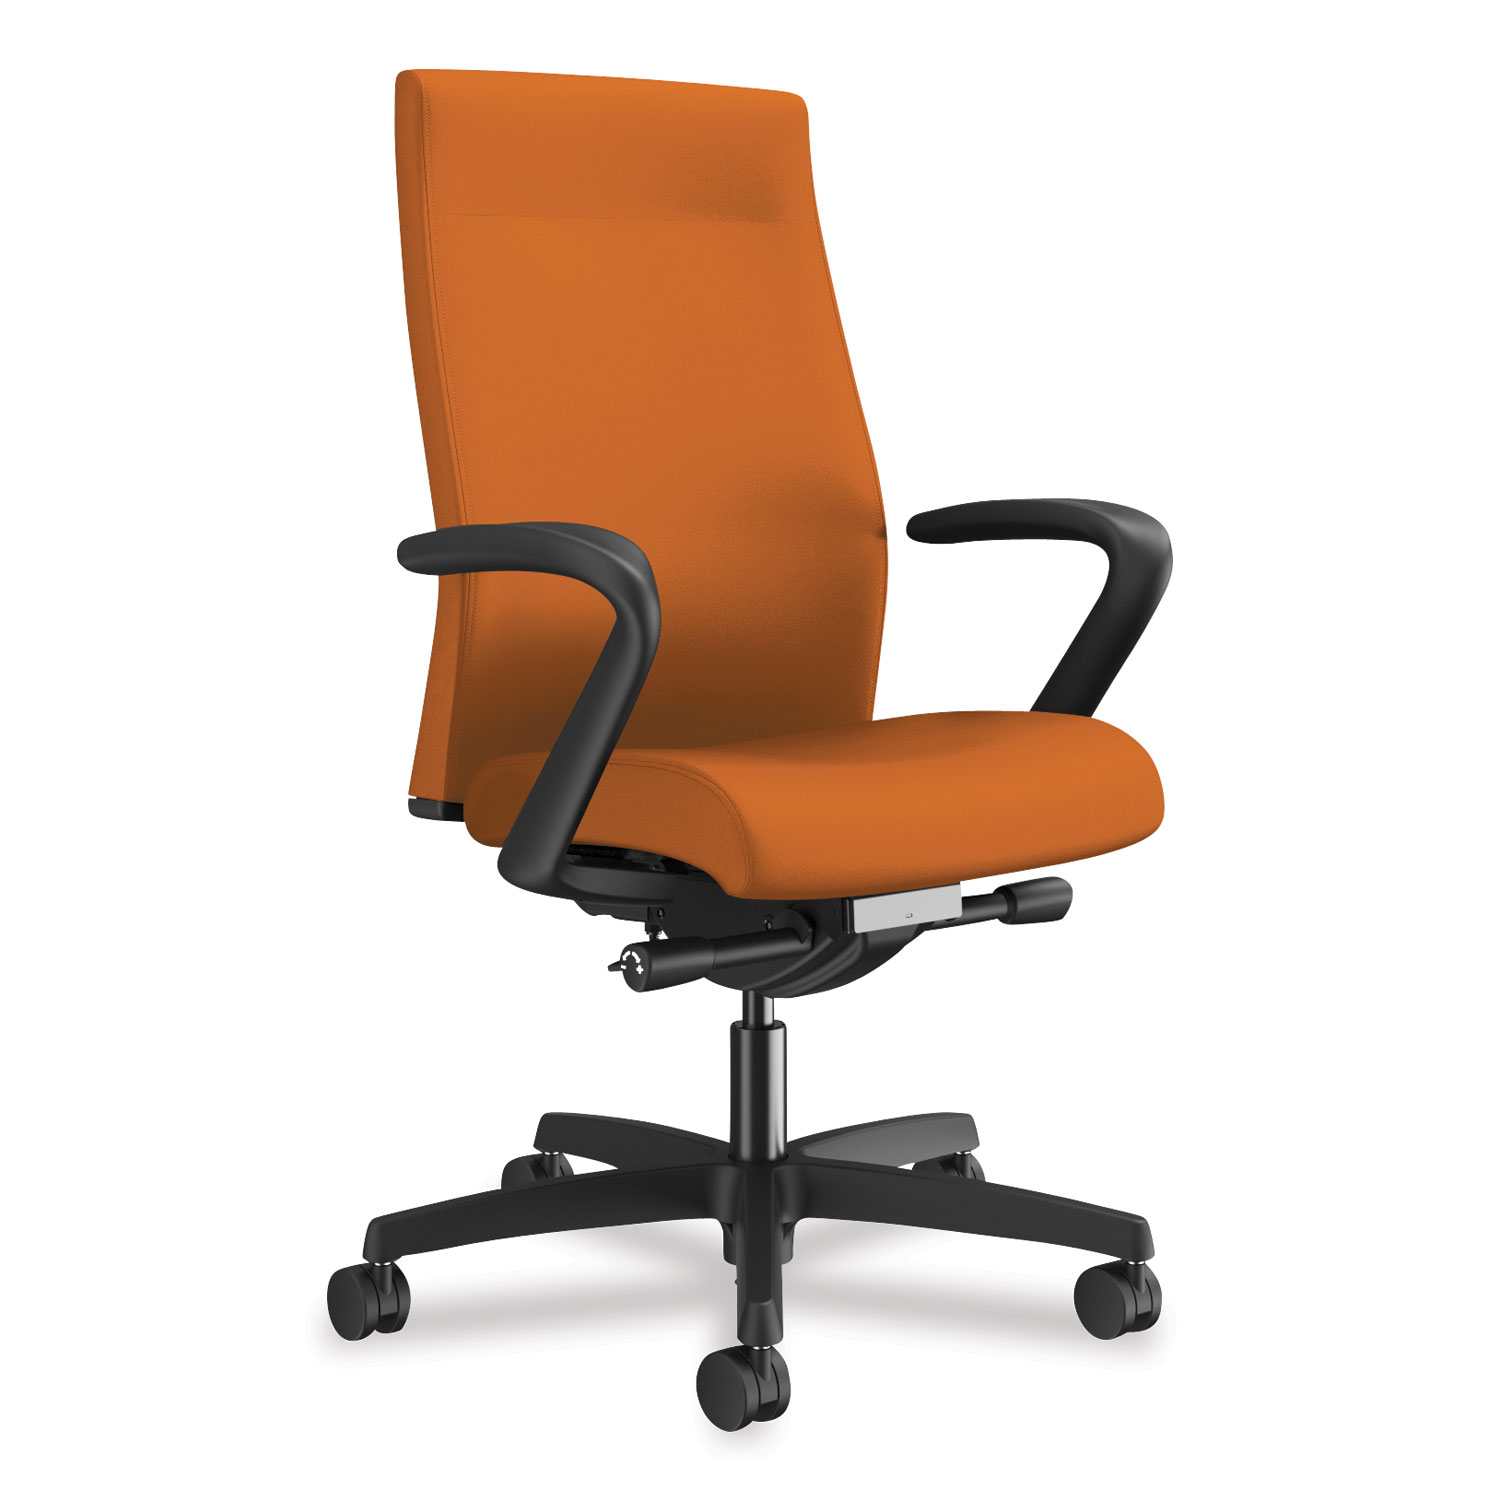  HON HONI2UL2FC47TK Ignition 2.0 Upholstered Mid-Back Task Chair, Supports up to 300 lbs., Apricot Seat, Apricot Back, Black Base (HONI2UL2FC47TK) 